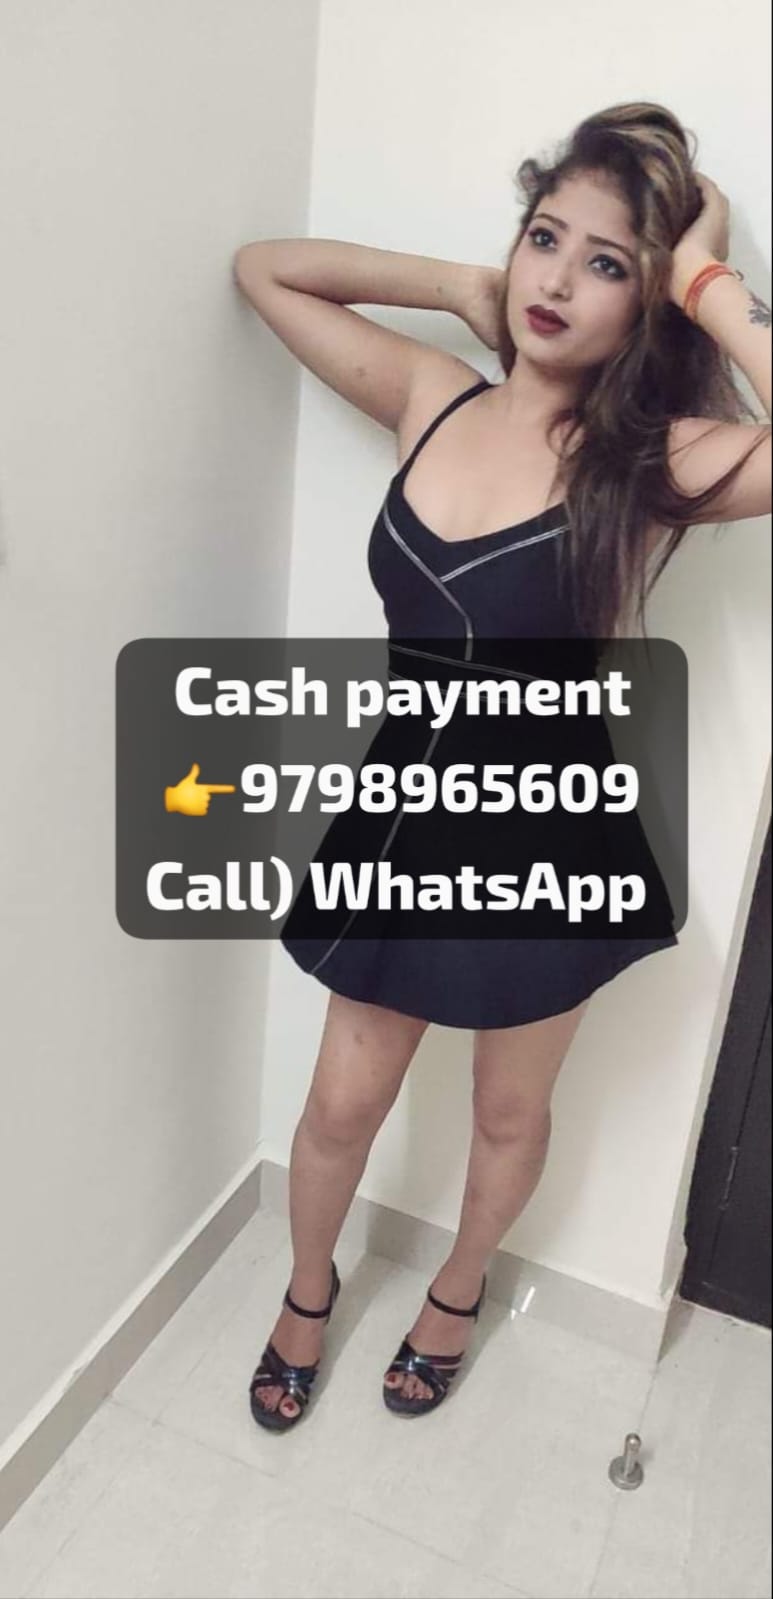 Howrah in high profile call girl full sucking anal sex cash payment 